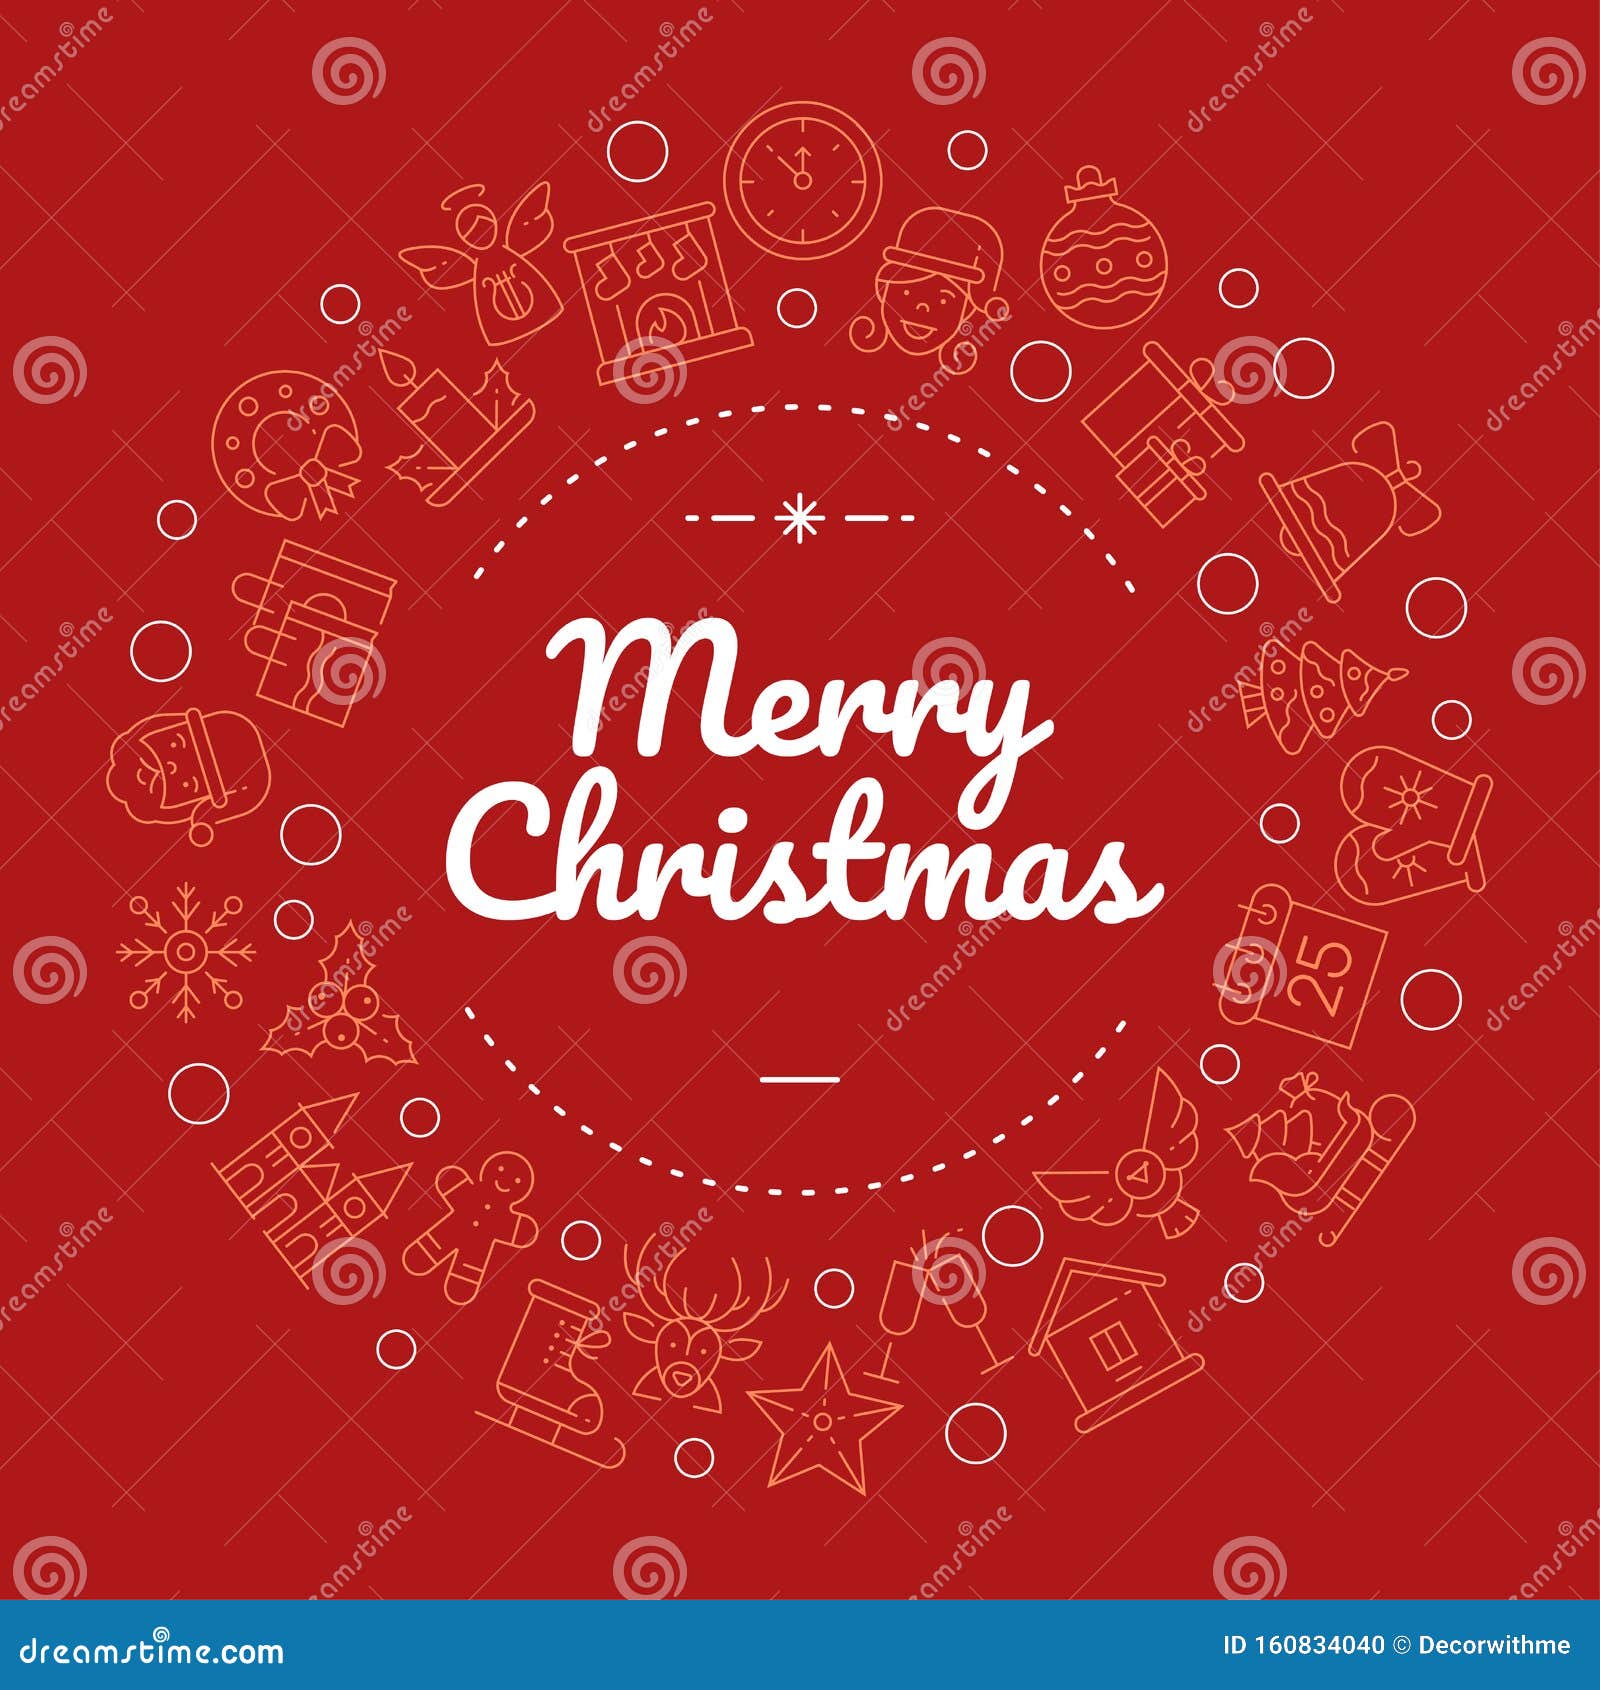 Merry Christmas Social Media Banner with Linear Icons Template Stock ...